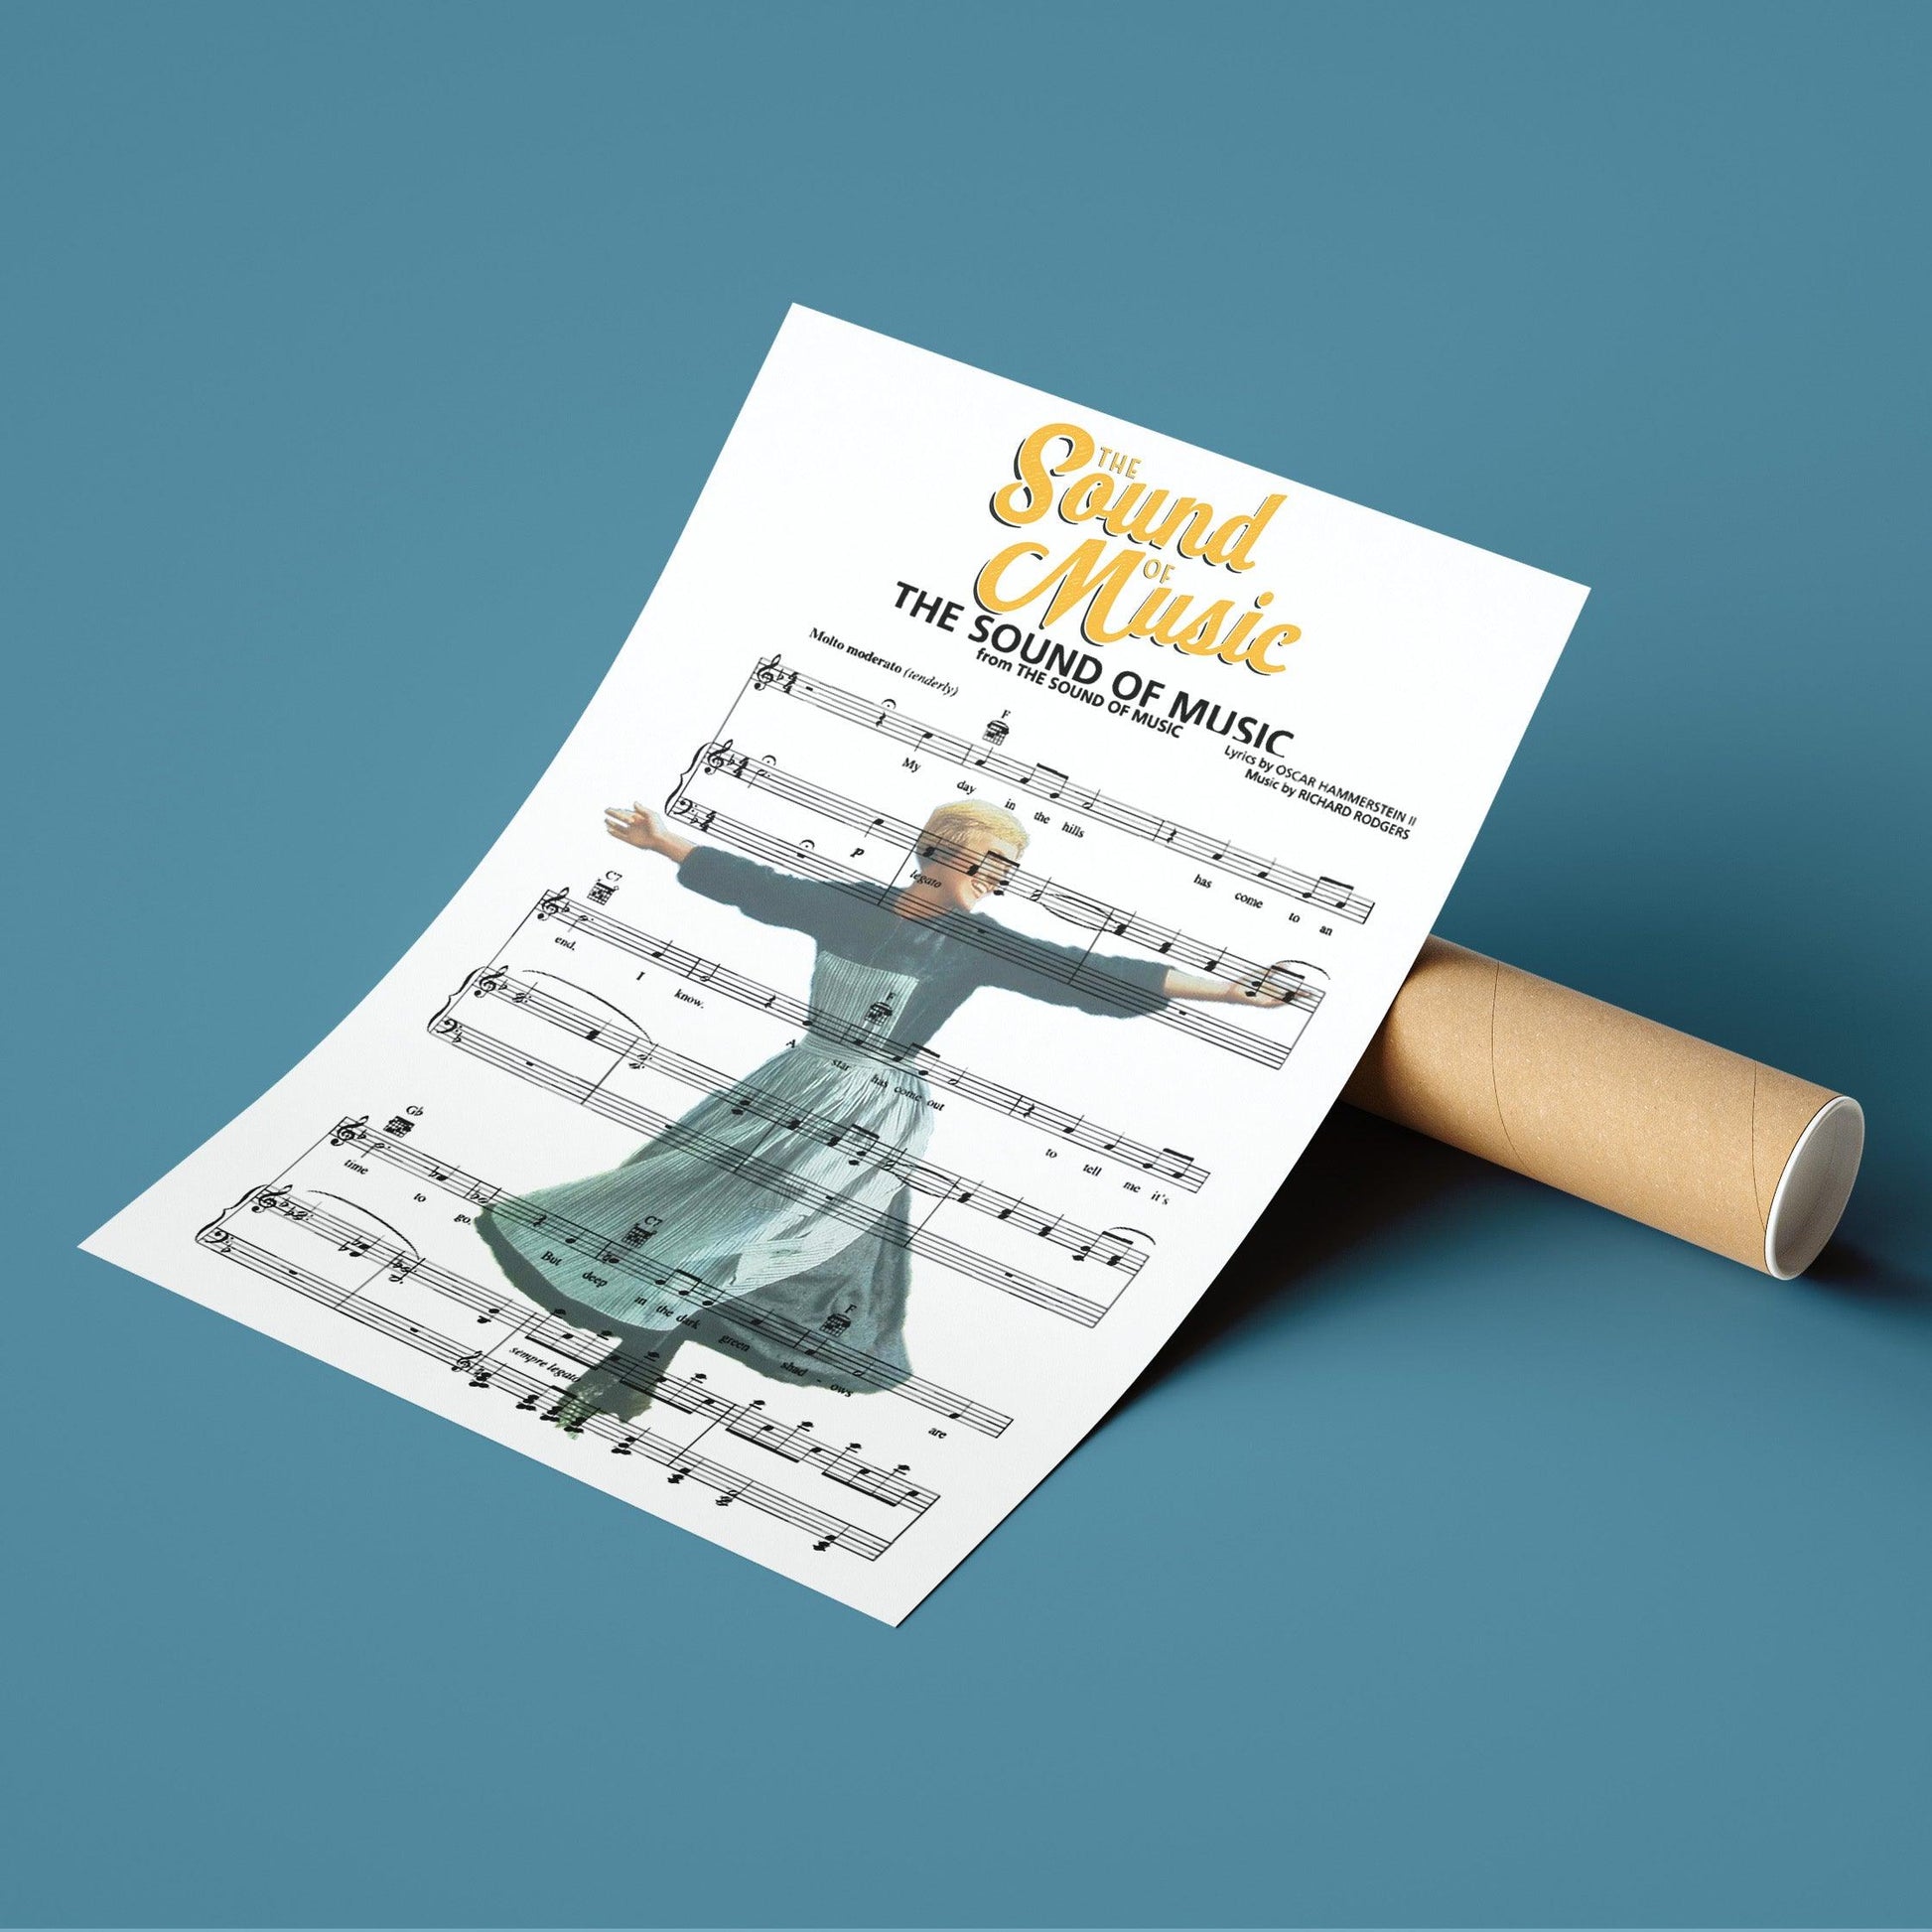 The Sound of Music Print | Song Music Sheet Notes Print Everyone has a favorite song especially The Sound of Music Print, and now you can show the score as printed staff. The personal favorite song sheet print shows the song chosen as the score. 